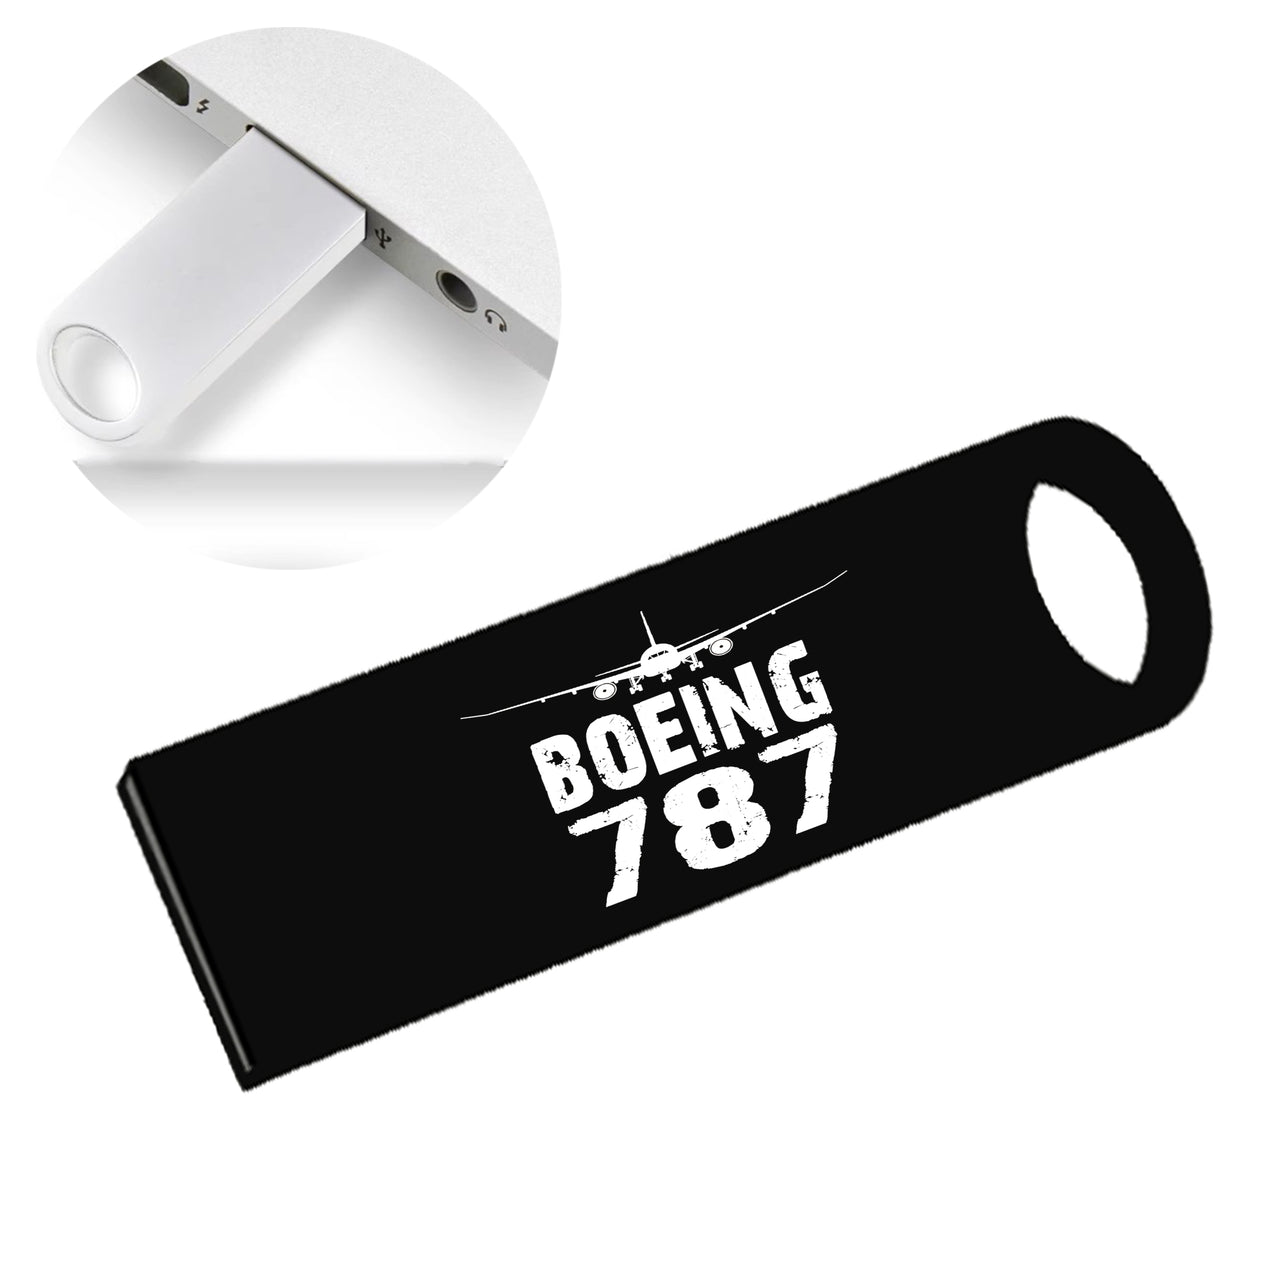 Boeing 787 & Plane Designed Waterproof USB Devices